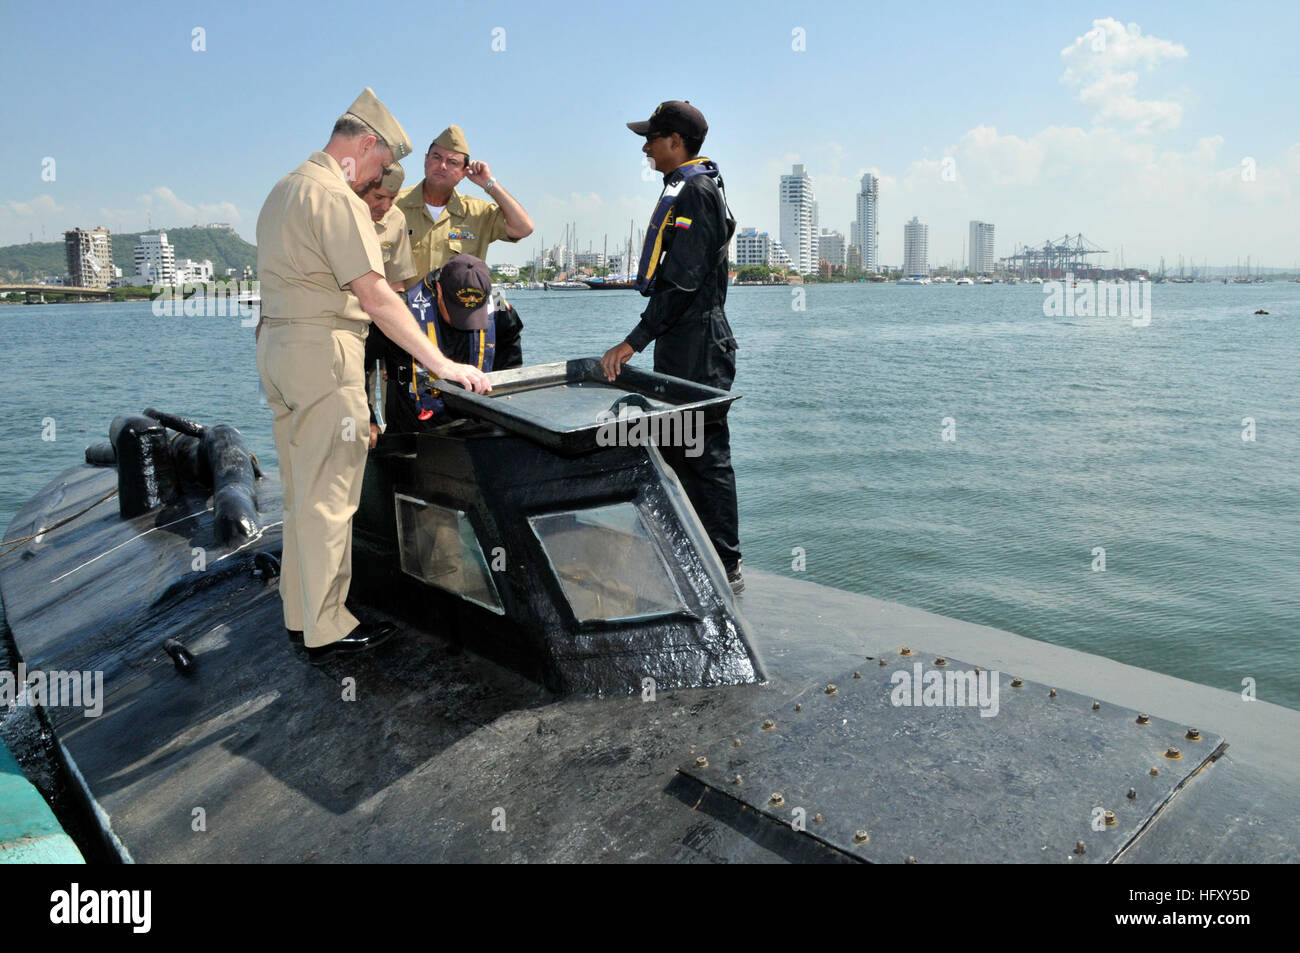 091205-N-8273J-174 CARTAGENA, Colombia (Dec. 5, 2009) Chief of Naval Operations (CNO) Adm. Gary Roughead, left, tours a semi-submersible boat while meeting with Colombian Coast Guard Forces at Naval Base Bolivar. The boat was seized from drug smugglers in the Caribbean. (U.S. Navy photo by Mass Communication Specialist 1st Class Tiffini Jones Vanderwyst/Released) US Navy 091205-N-8273J-174 Chief of Naval Operations (CNO) Adm. Gary Roughead, left, tours a semi-submersible boat while meeting with Colombian Coast Guard Forces at Naval Base Bolivar Stock Photo